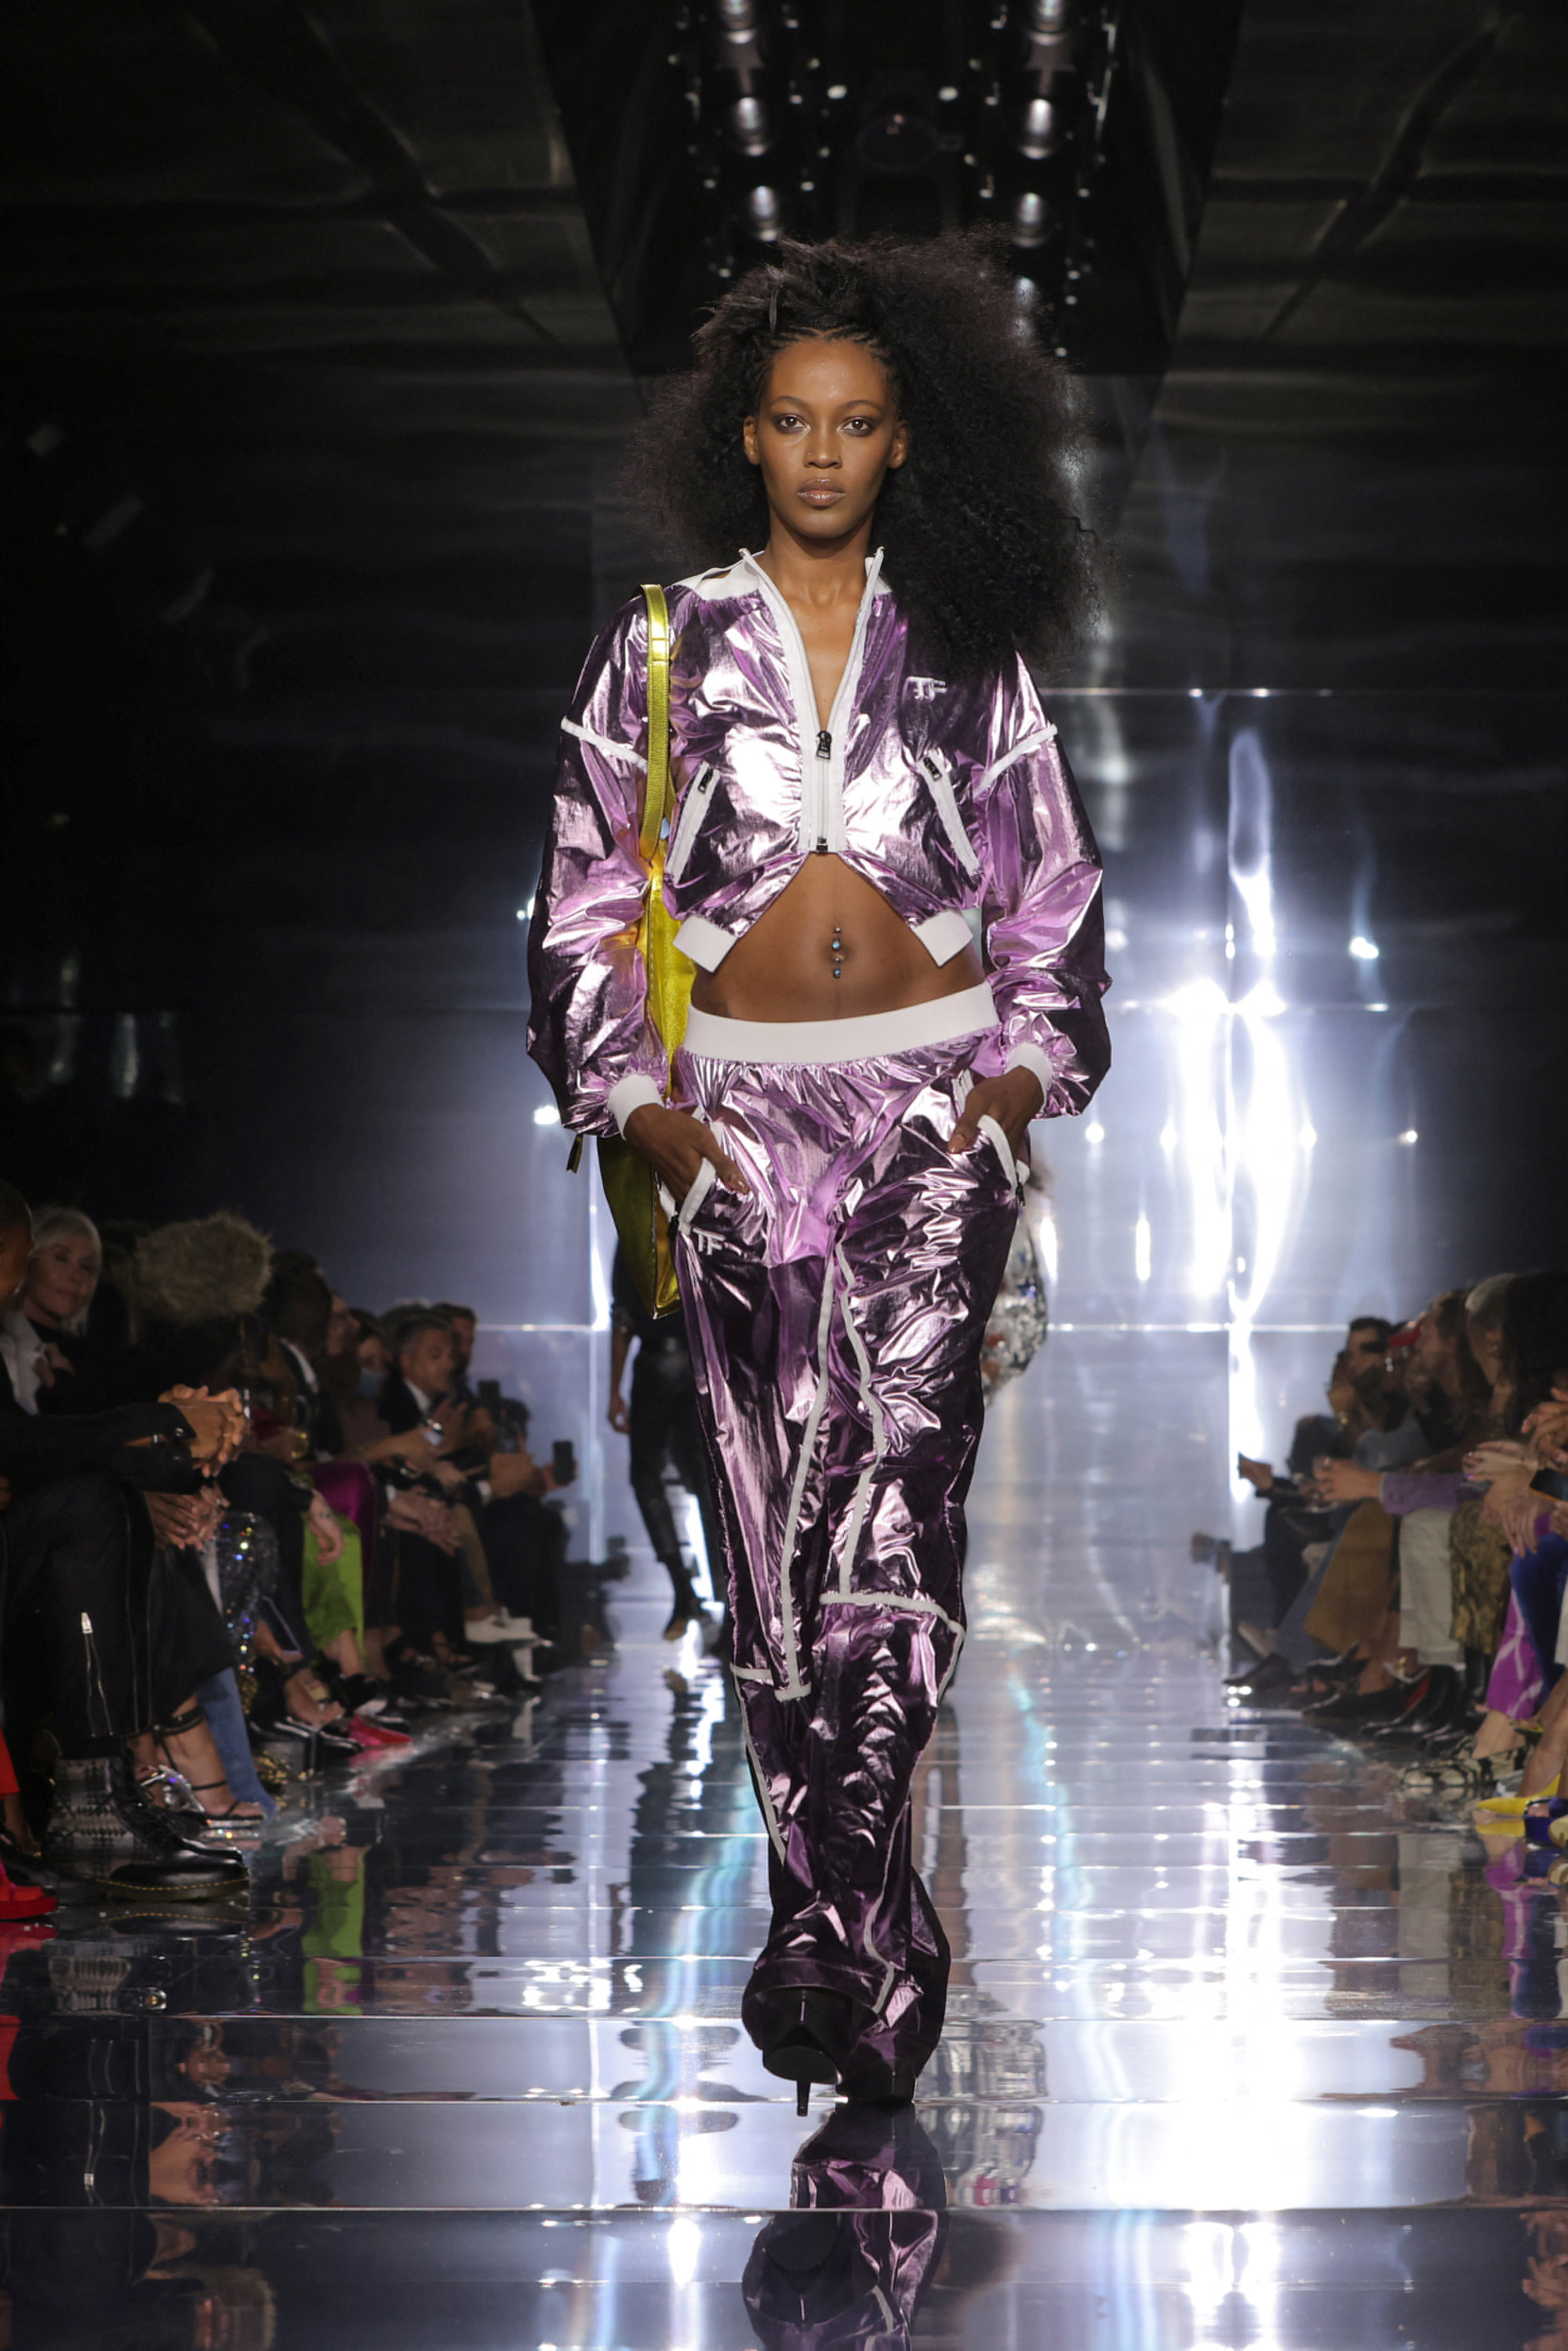 New York Fashion Week: Tom Ford threw a 70s party with big hair and ...